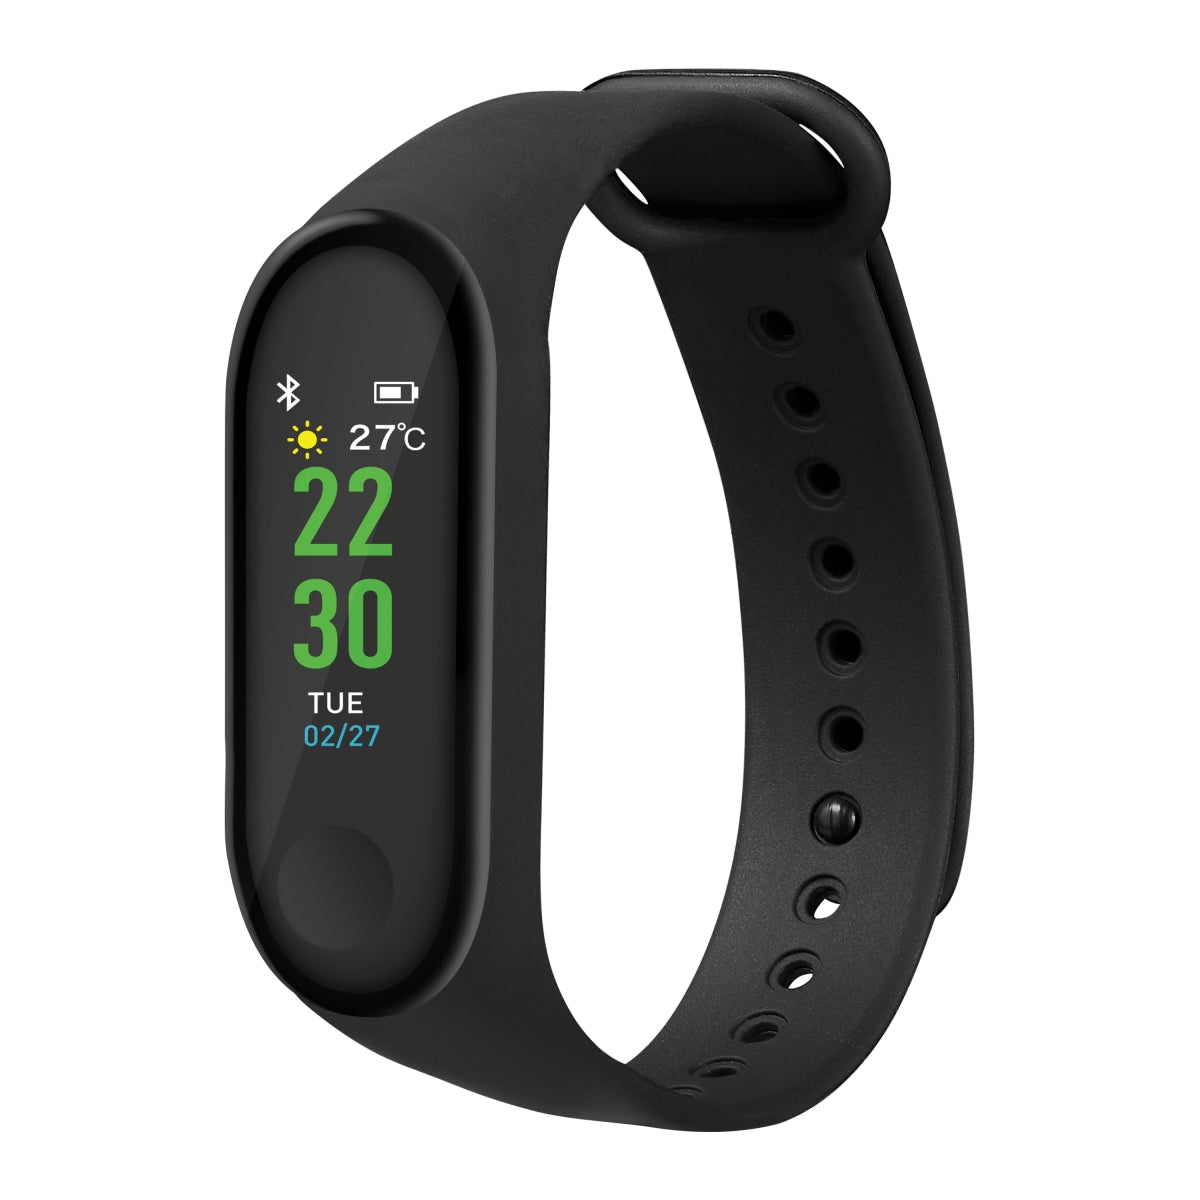 Bounce Circuit Series Activity Band with Heart Rate Monitor - Black PDQ of 10